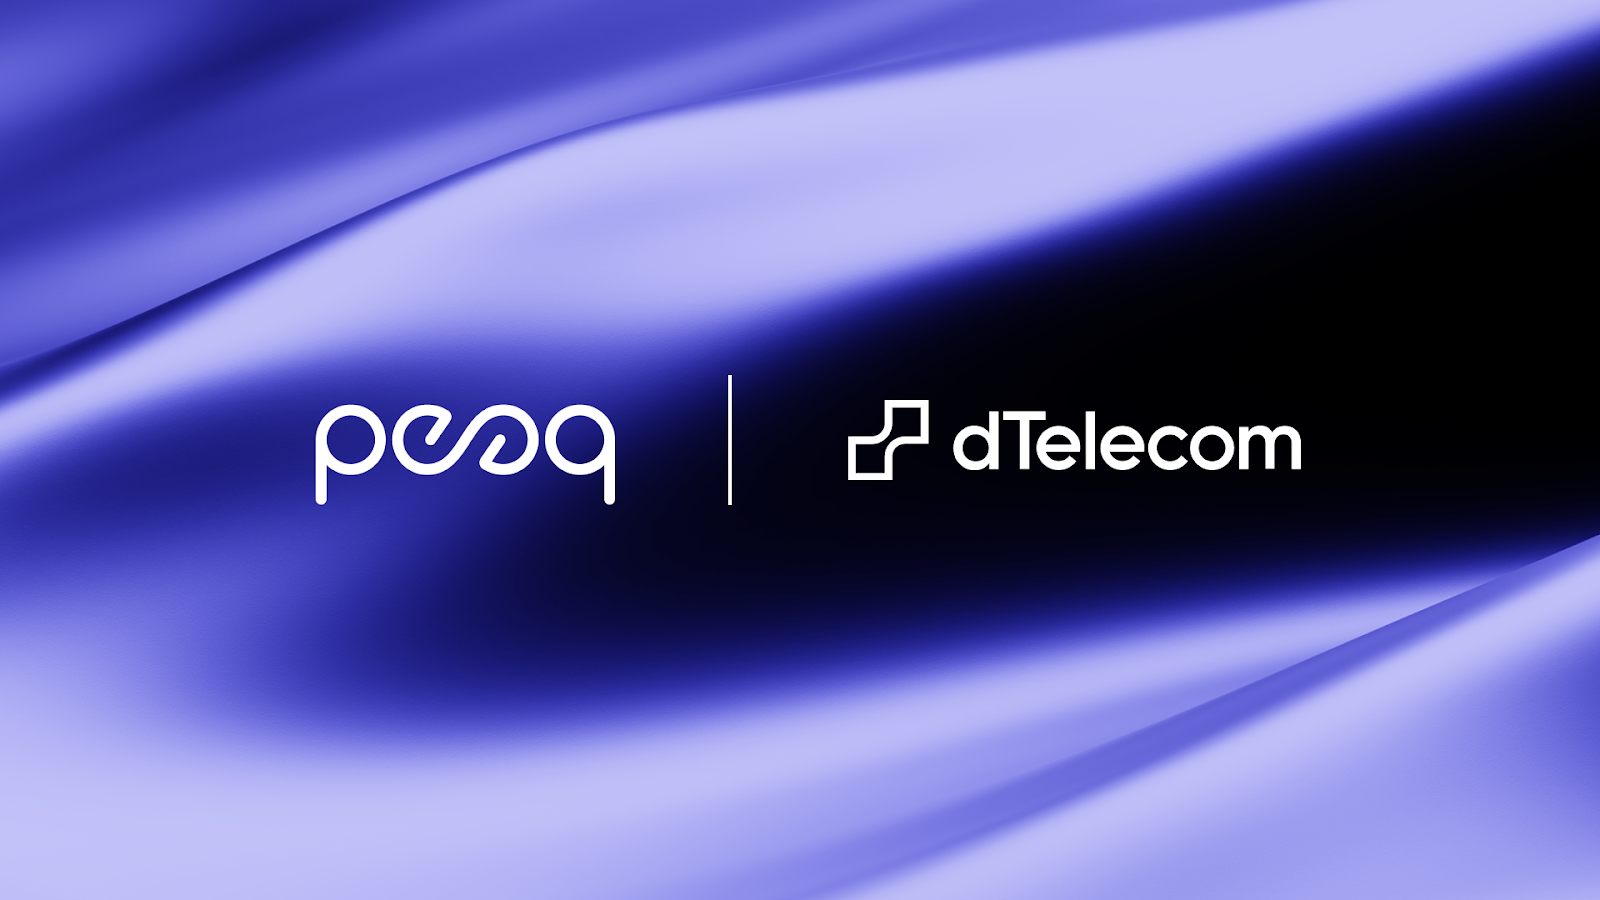 dTelecom, an innovative DePIN working as a live streaming and real-time communication layer for apps and dApps, taps peaq as its layer-1 backbone, preparing to migrate from the Arbitrum ecosystem.